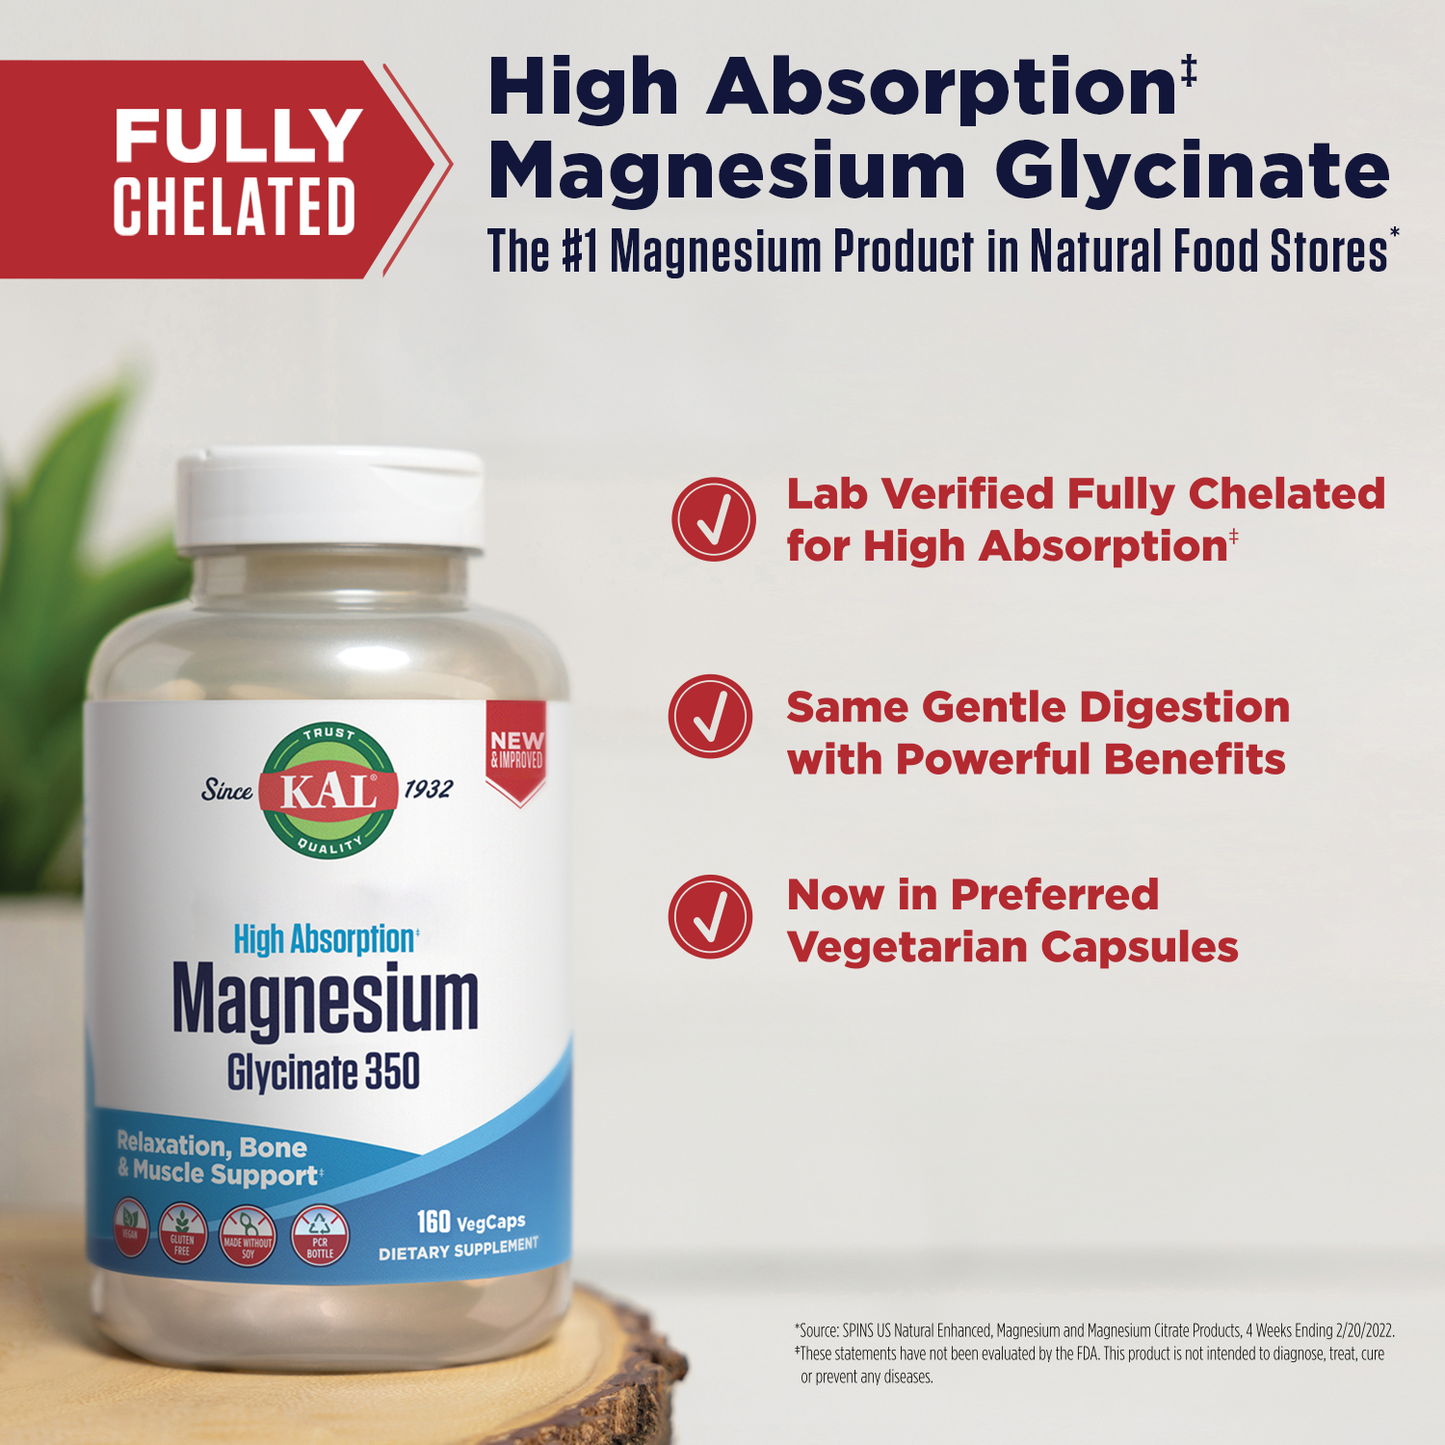 KAL Magnesium Glycinate Capsules, Fully Chelated Magnesium Bisglycinate, High Absorption Magnesium Supplement, Healthy Bones, Muscle, Relaxation and Stress Support, Non-GMO